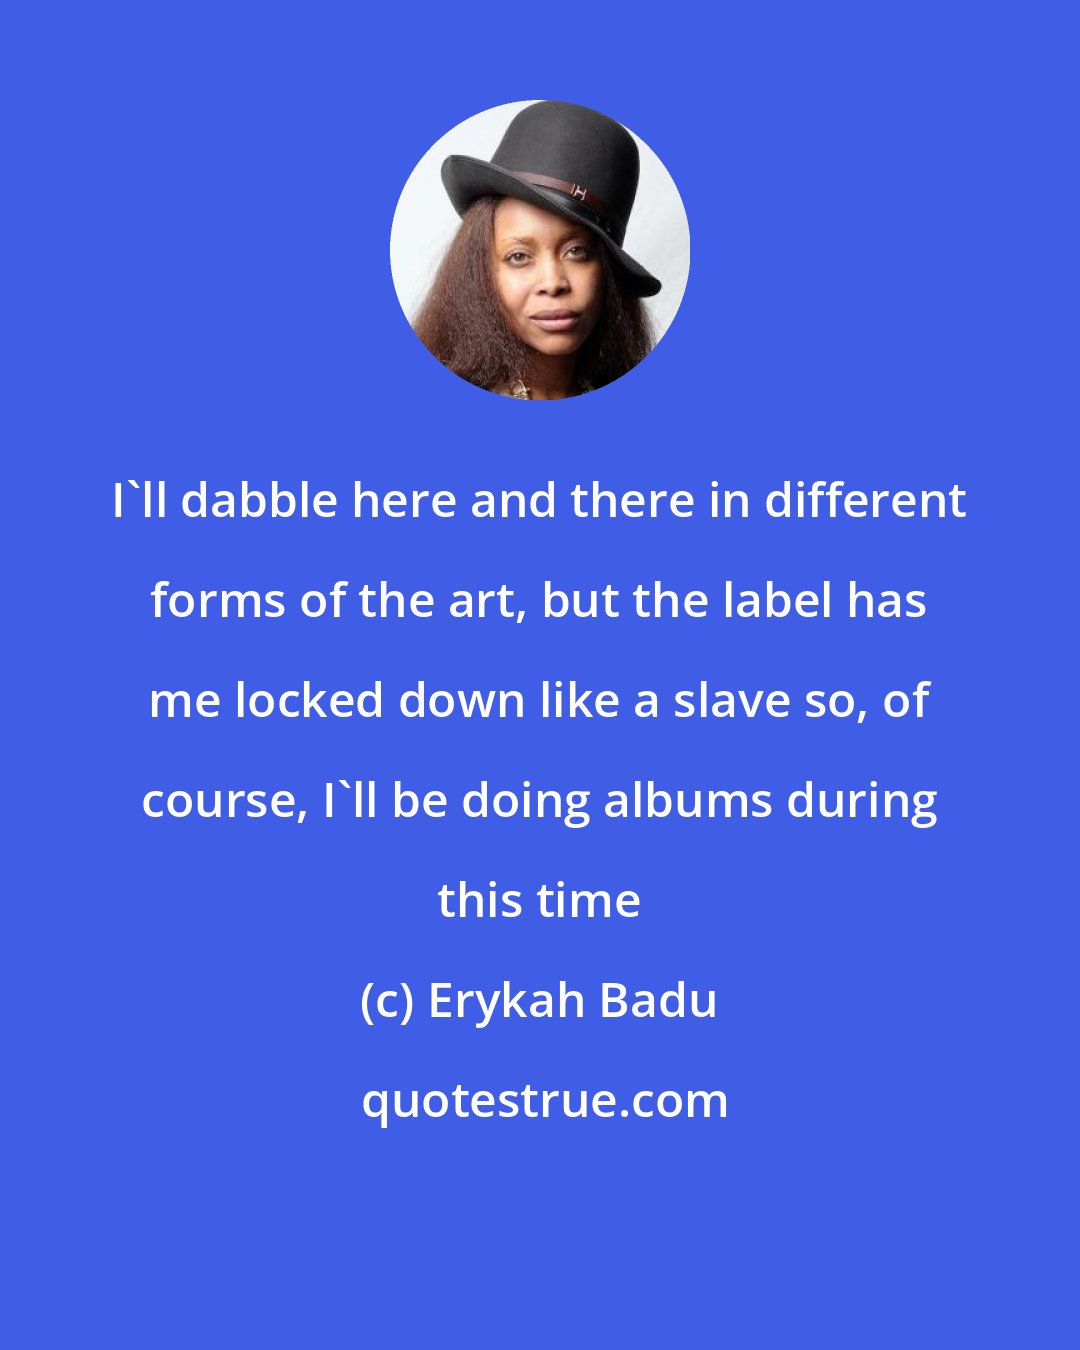 Erykah Badu: I'll dabble here and there in different forms of the art, but the label has me locked down like a slave so, of course, I'll be doing albums during this time